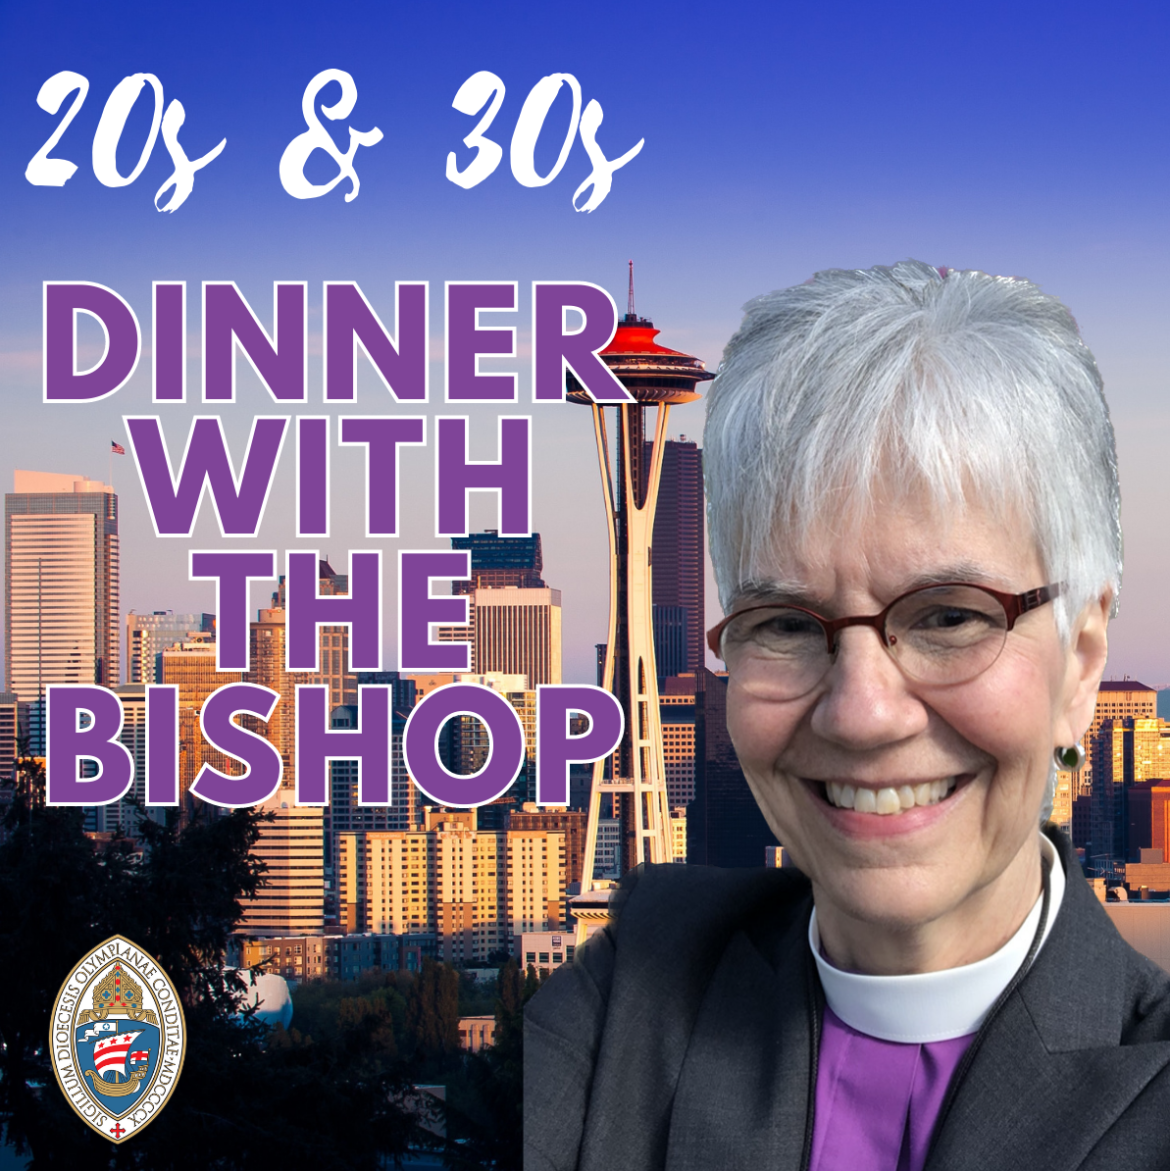 20s/30s Dinner with the Bishop